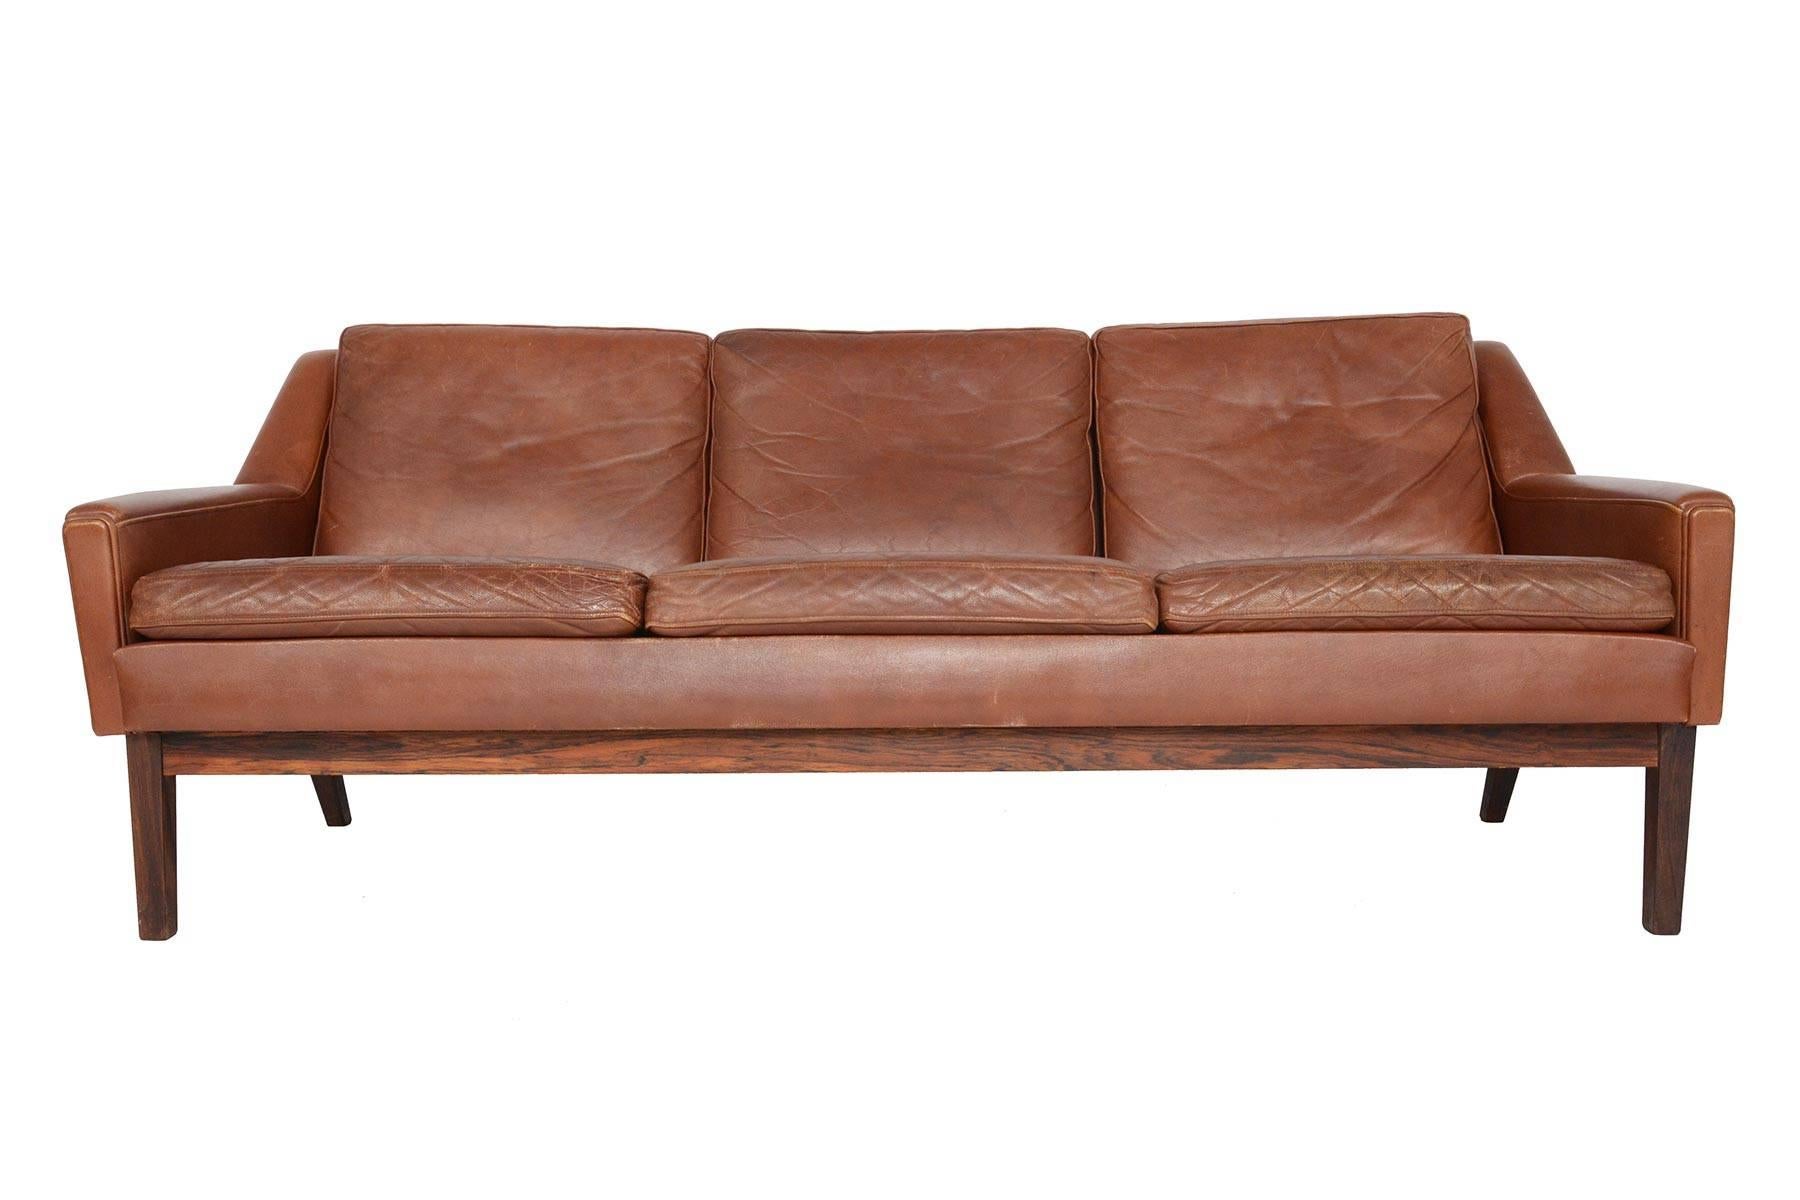 This Danish modern mid century three seat sofa in patinated rust toned leather will make a statement in any modern home. Covered in original leather and raised on a beautiful sculpted rosewood base, this sofa is upholstered on all sides and can be